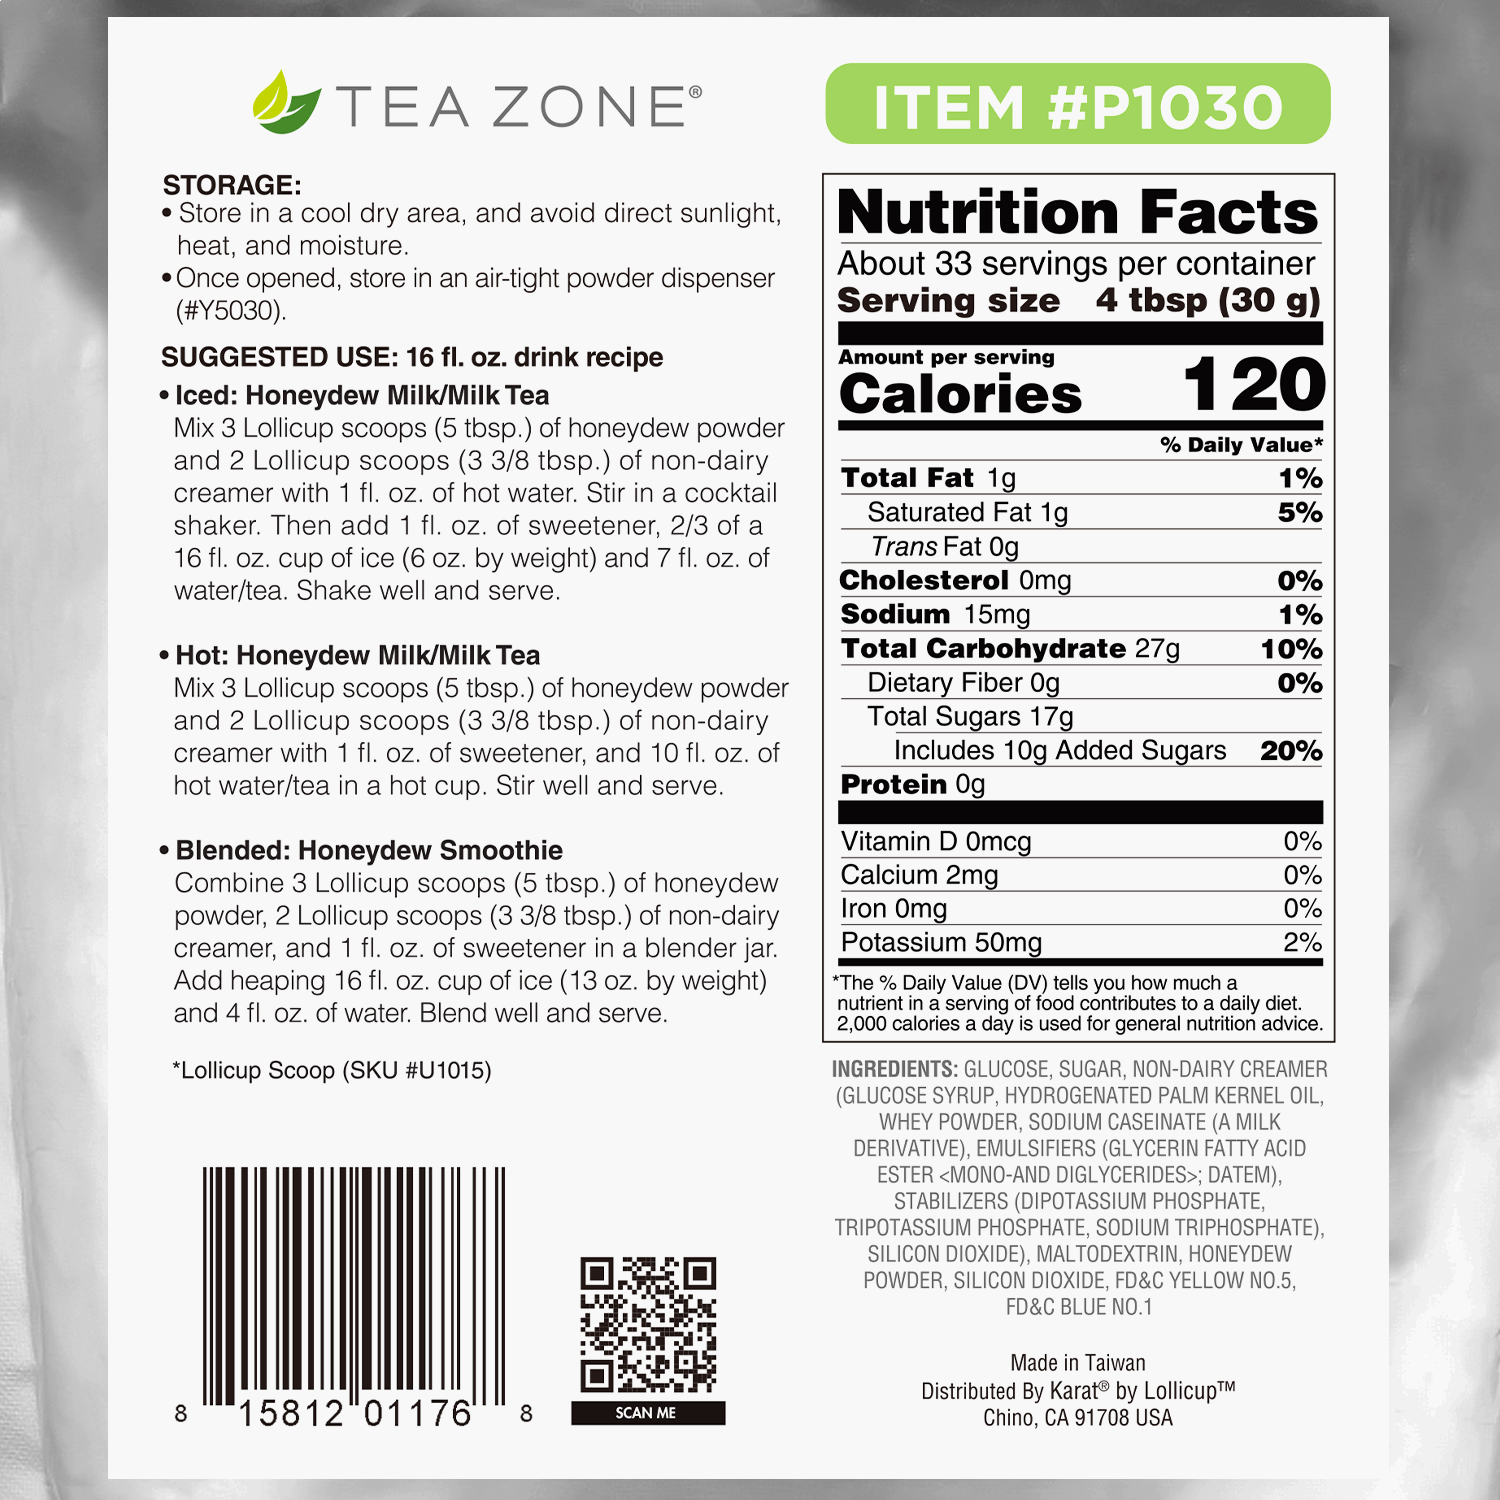 Tea Zone Honeydew Powder recipes, storage instructions, and nutrition facts